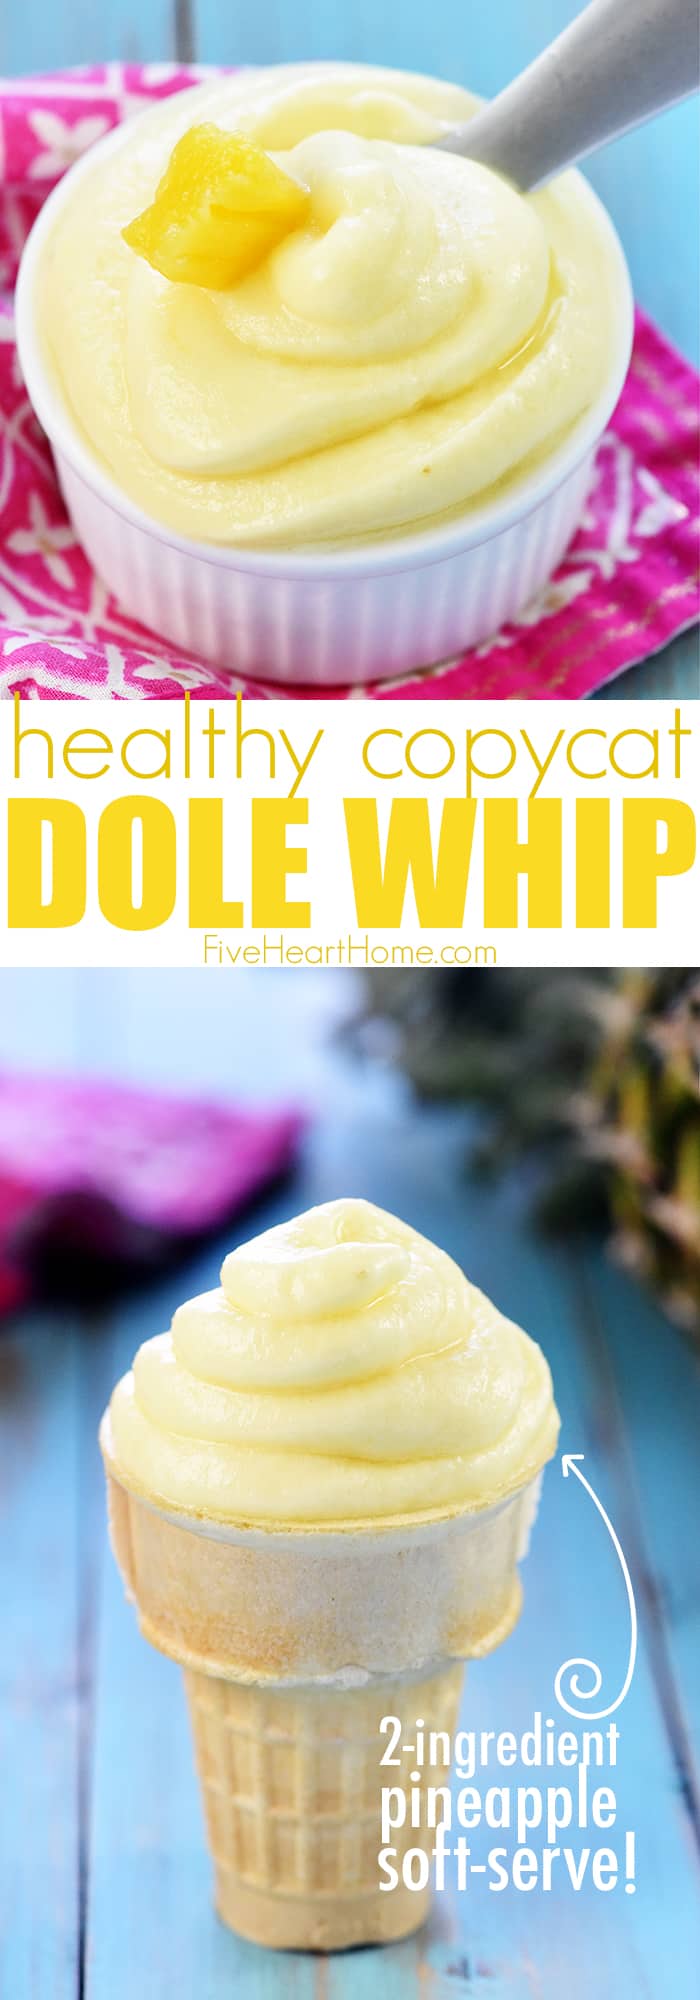 Healthy Copycat Dole Whip ~ made with just two ingredients, this frozen treat tastes like pineapple soft serve ice cream for an improved version of the Disney classic! | FiveHeartHome.com via @fivehearthome